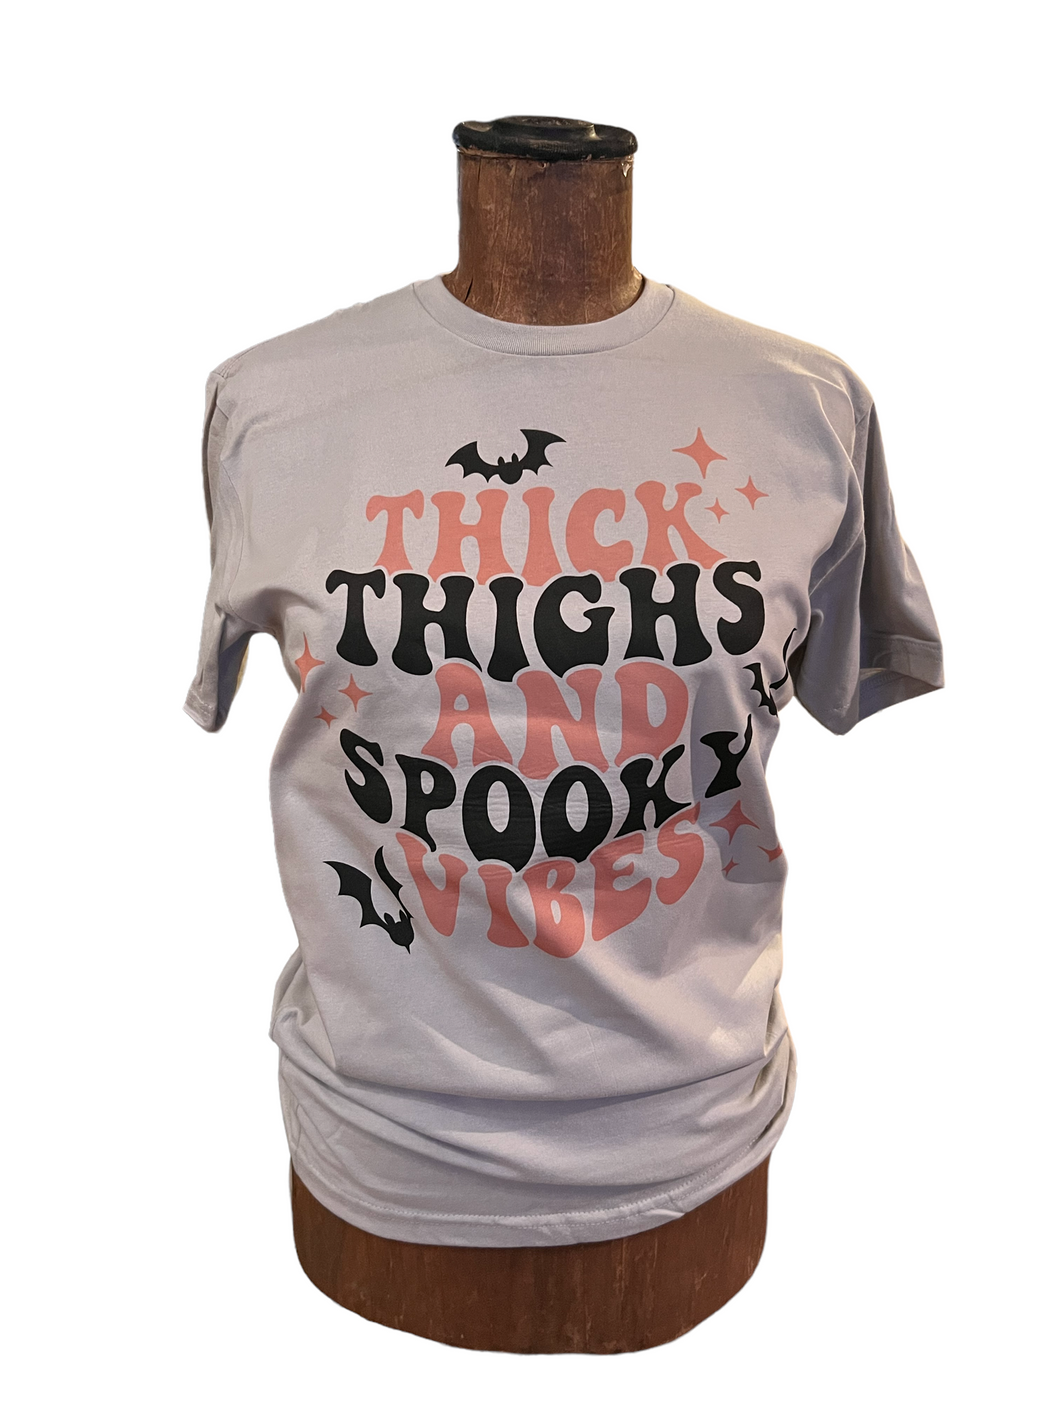 Thick thighs and spooky vibes t shirt